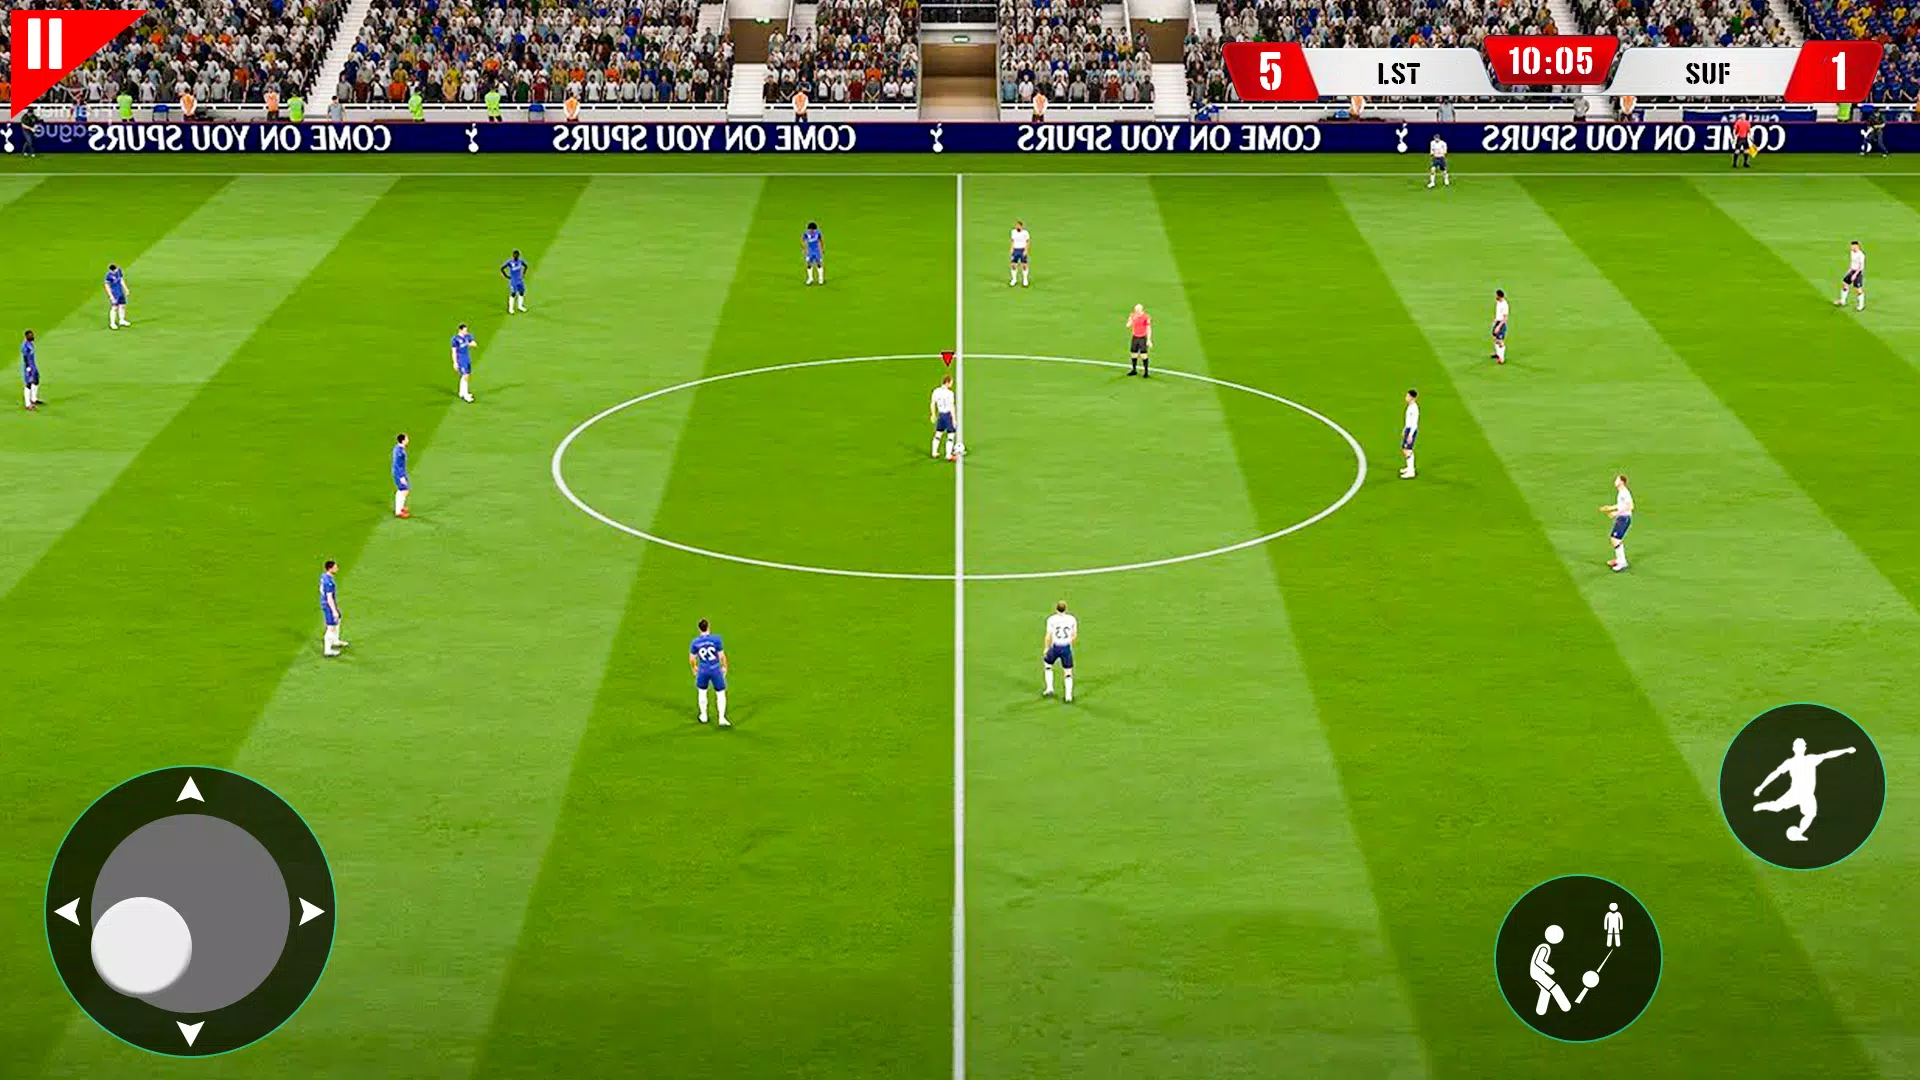 2 Player Soccer - APK Download for Android